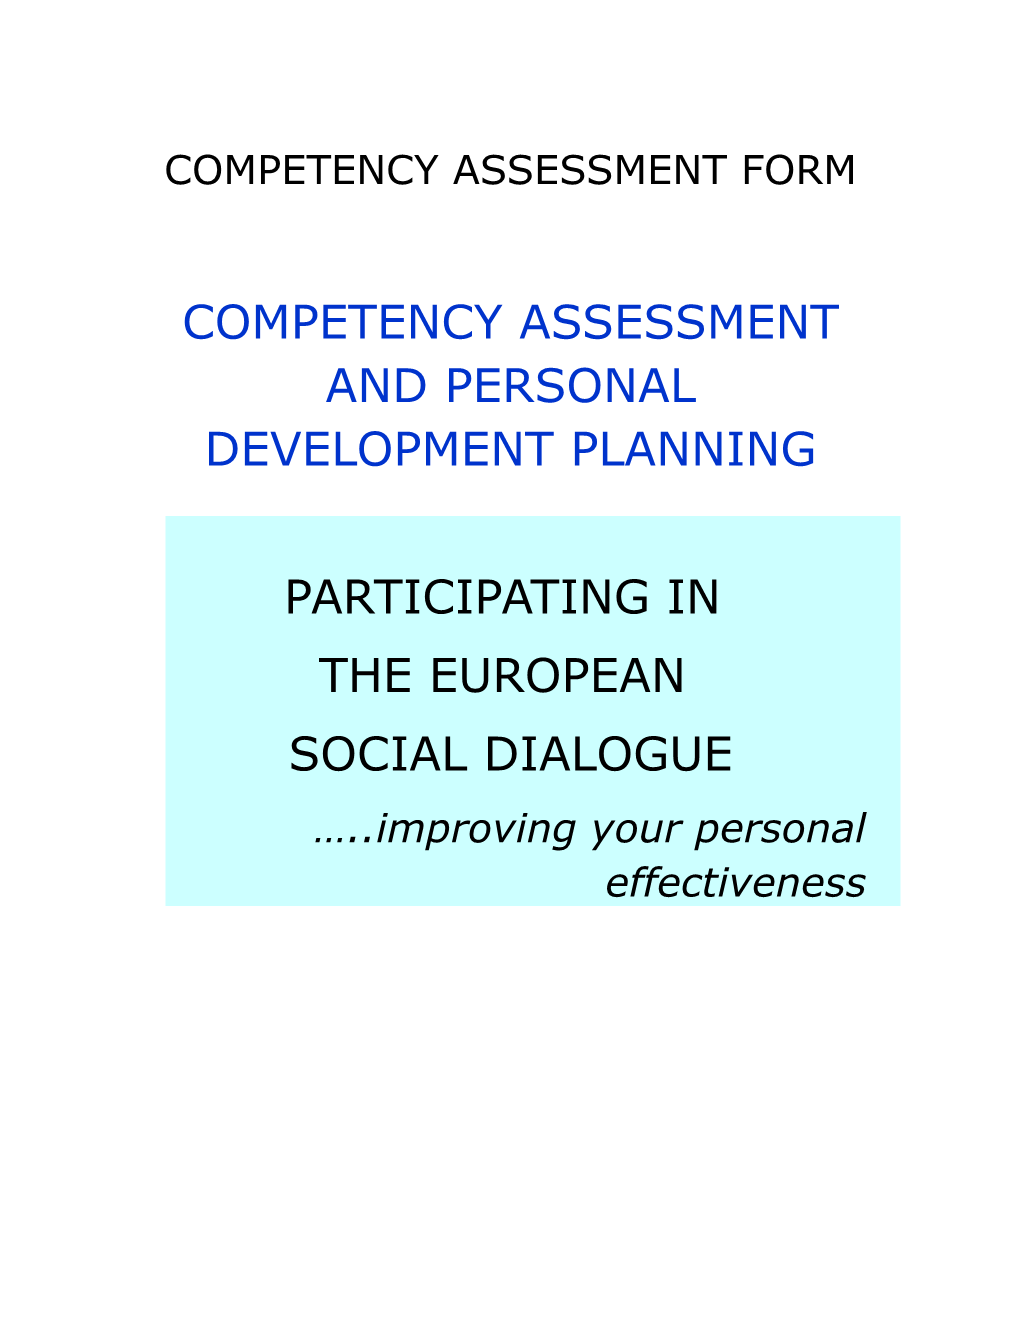 Competency Assessment and Personal Development Planning